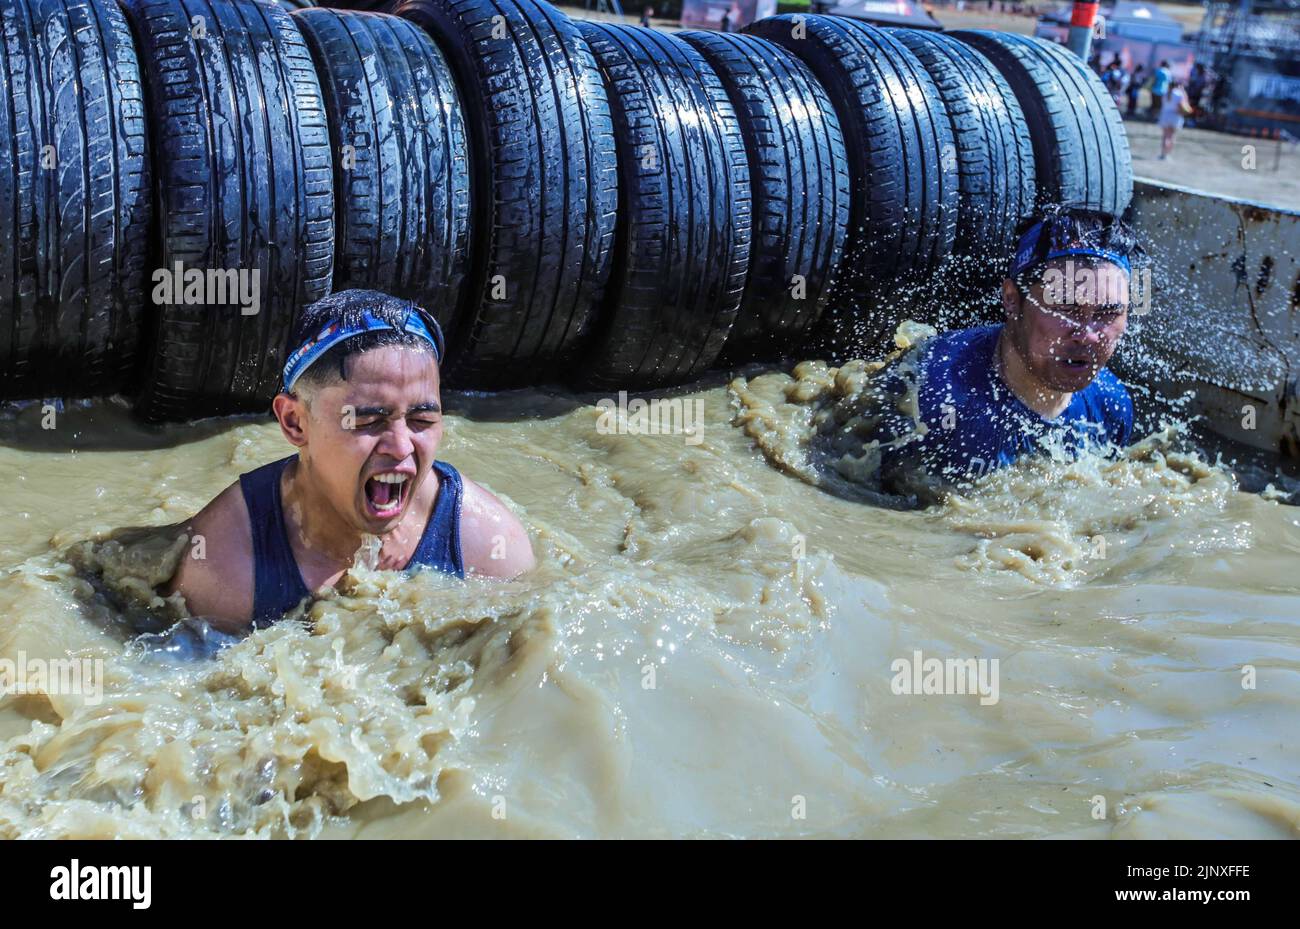 London UK 14 August 2022 Competitors of the Tough Mudder event in Morden Park London cherishing the challenge of conquering the different obstacles put between them and victory, Paul Quezada-Neiman/Alamy Live News Stock Photo